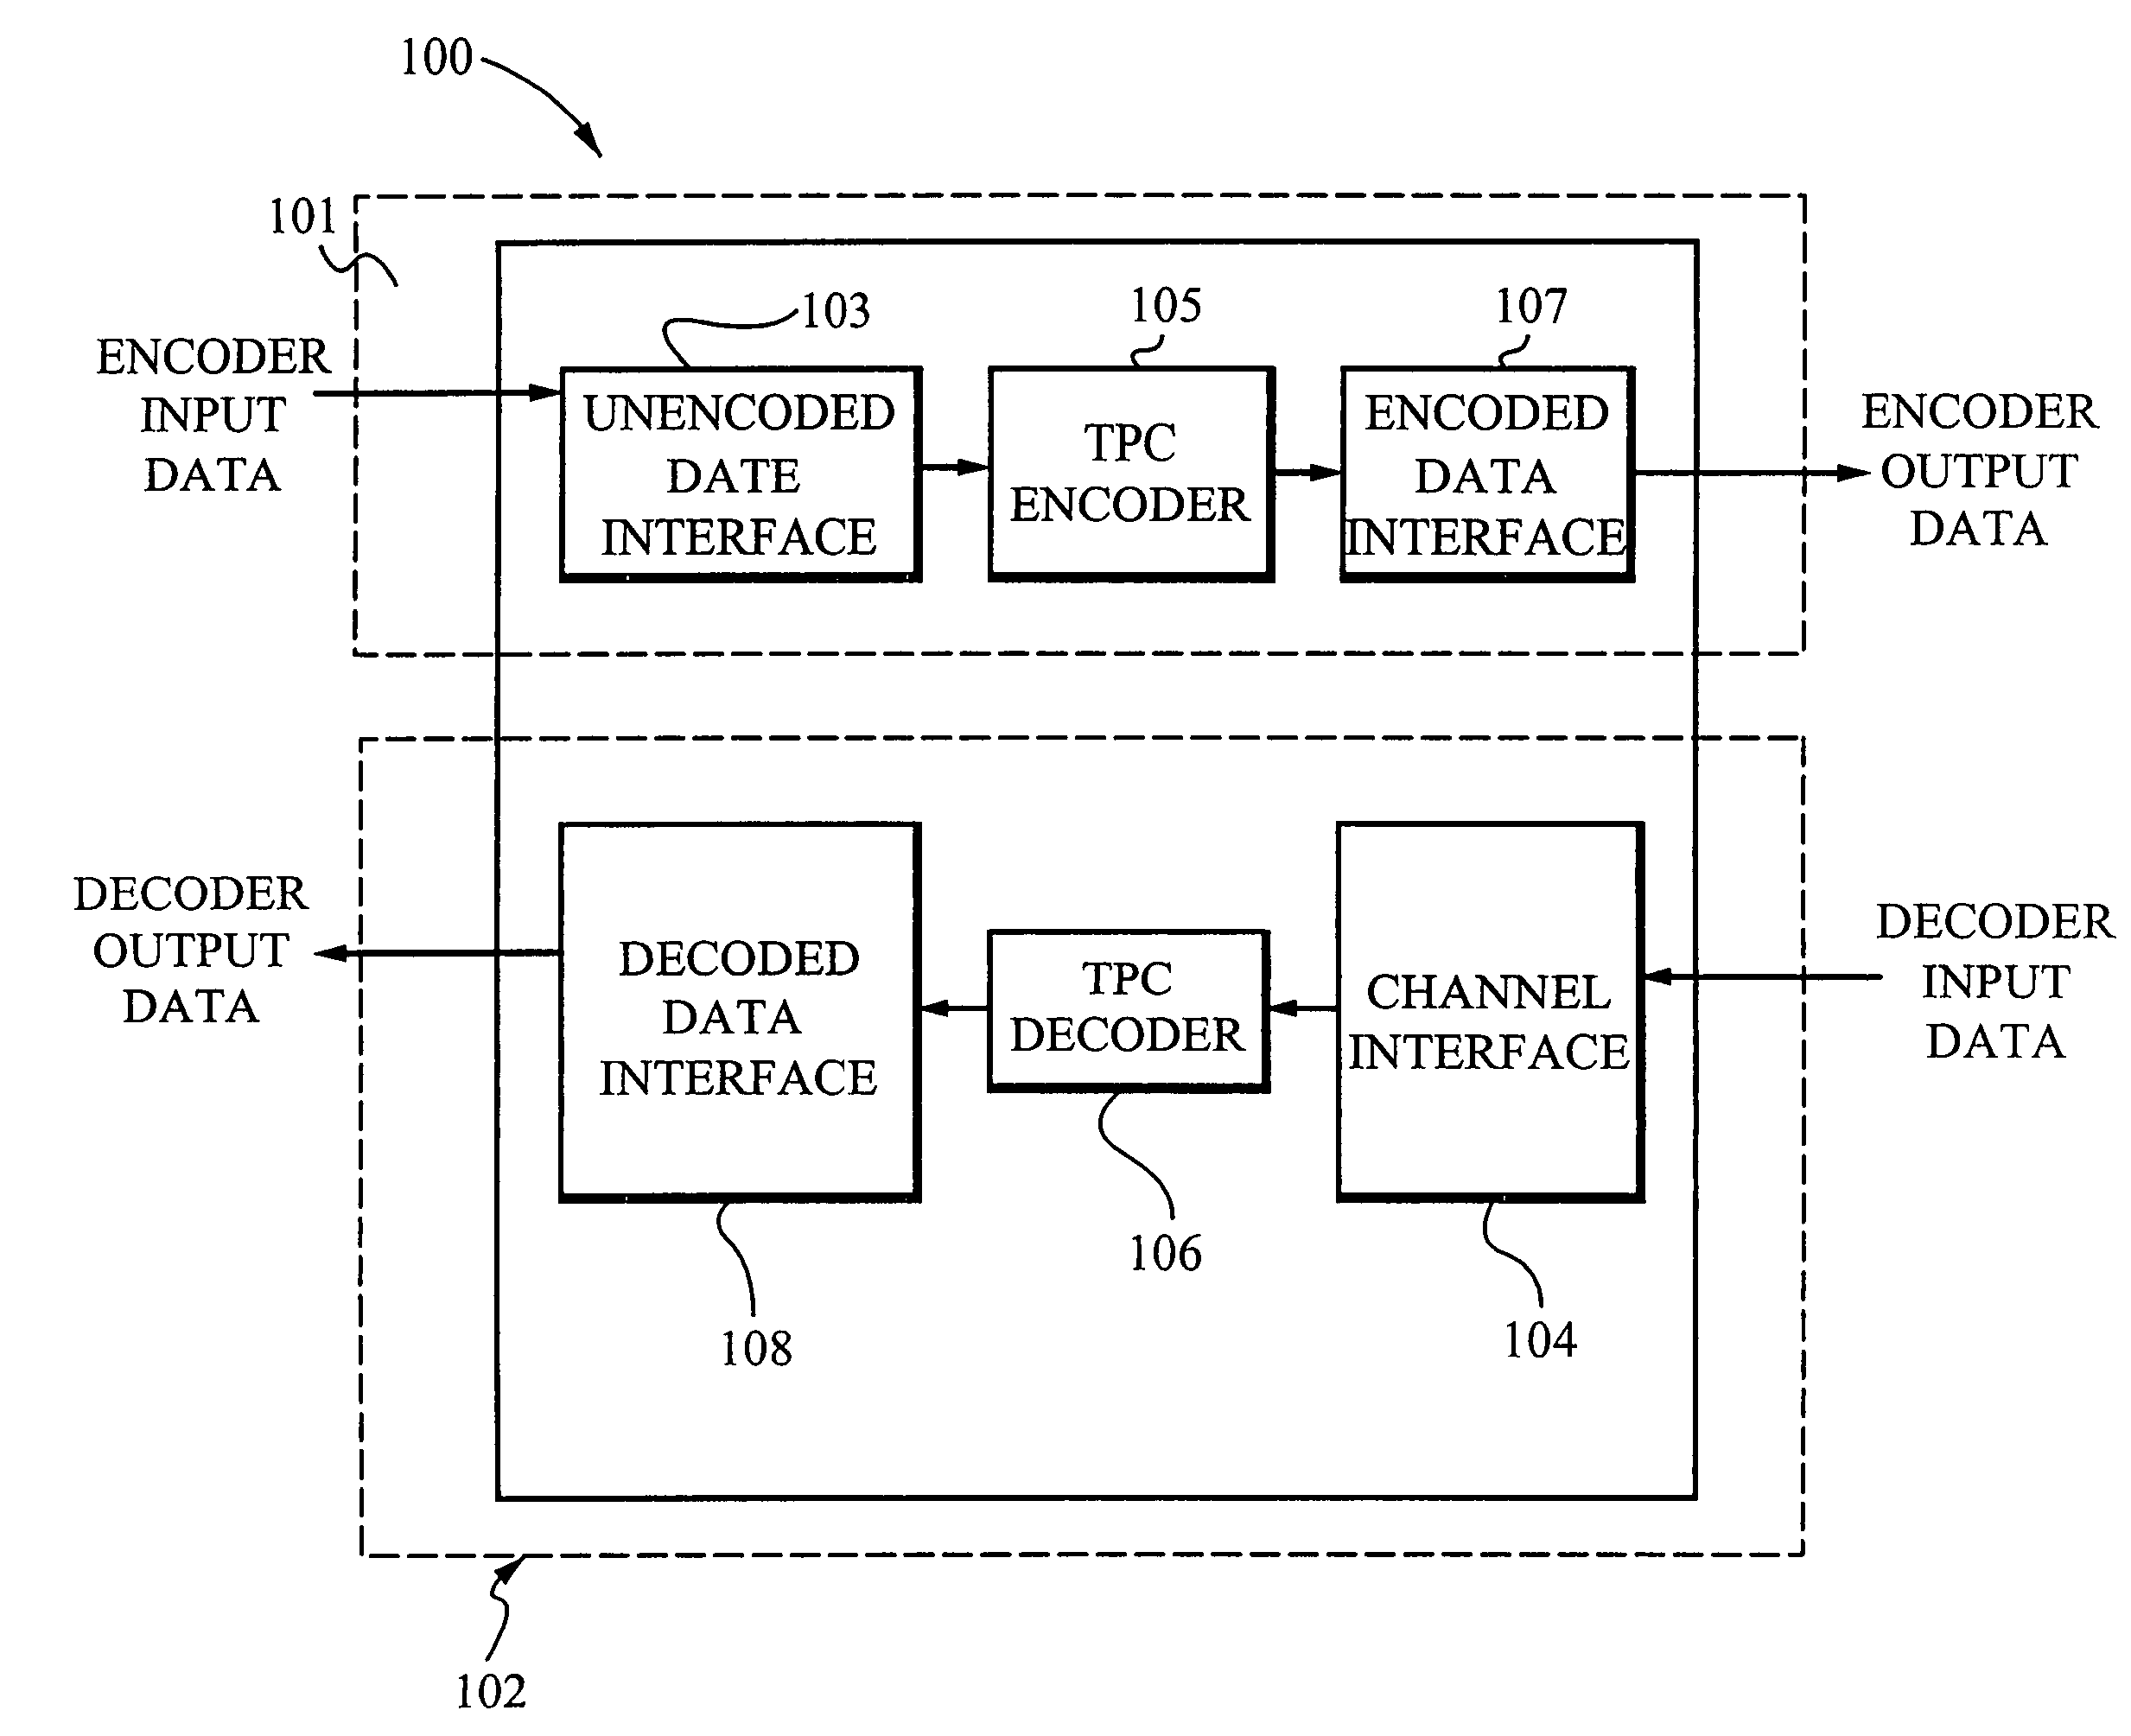 Enhanced turbo product code decoder system